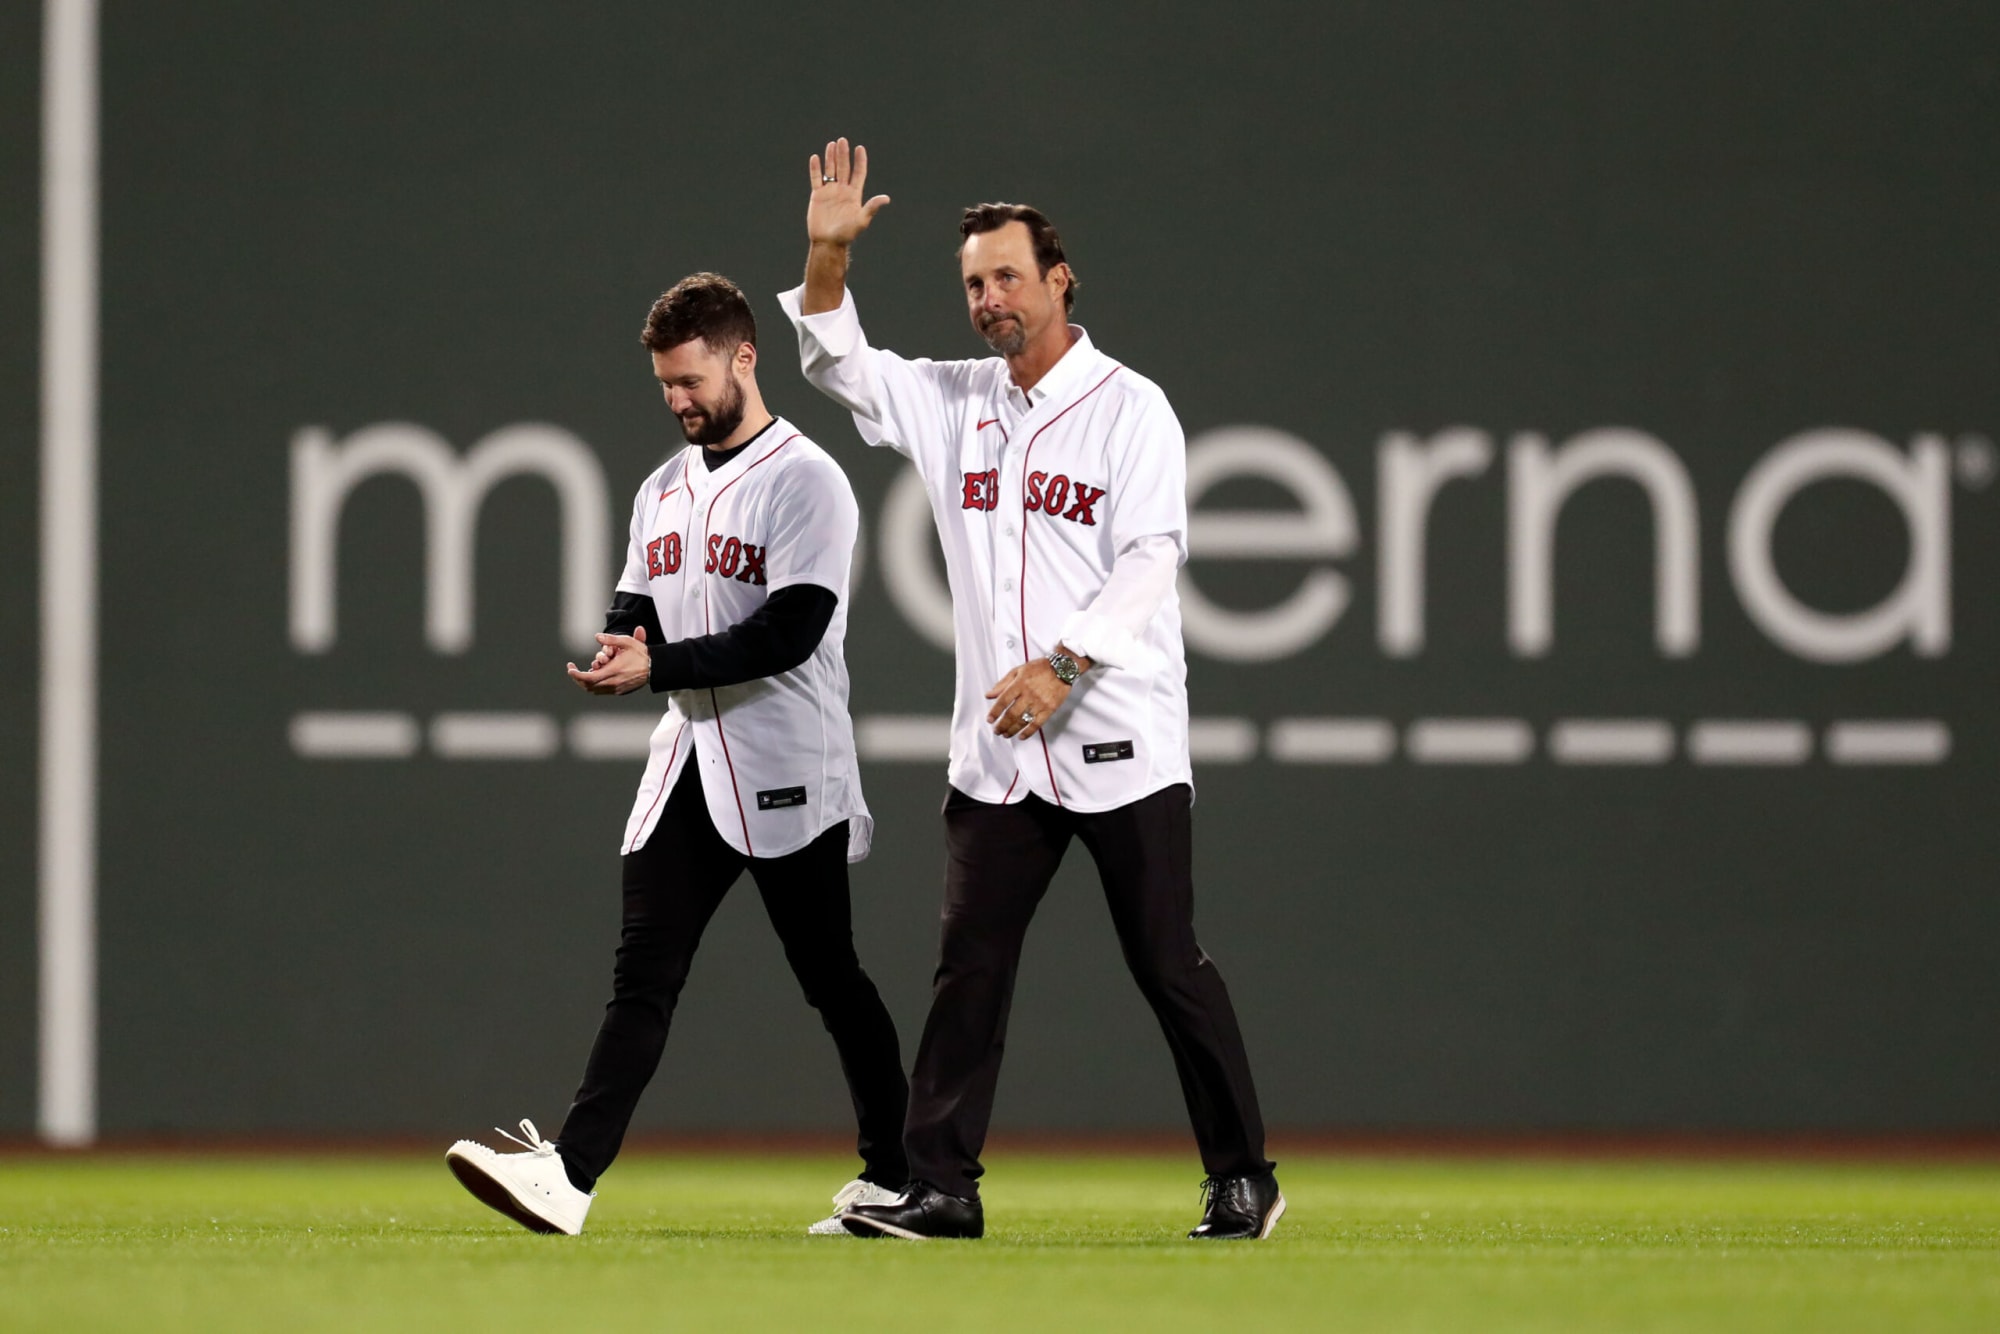 David Ortiz, Other Red Sox Legends Give Heartbreaking Tim Wakefield Tributes